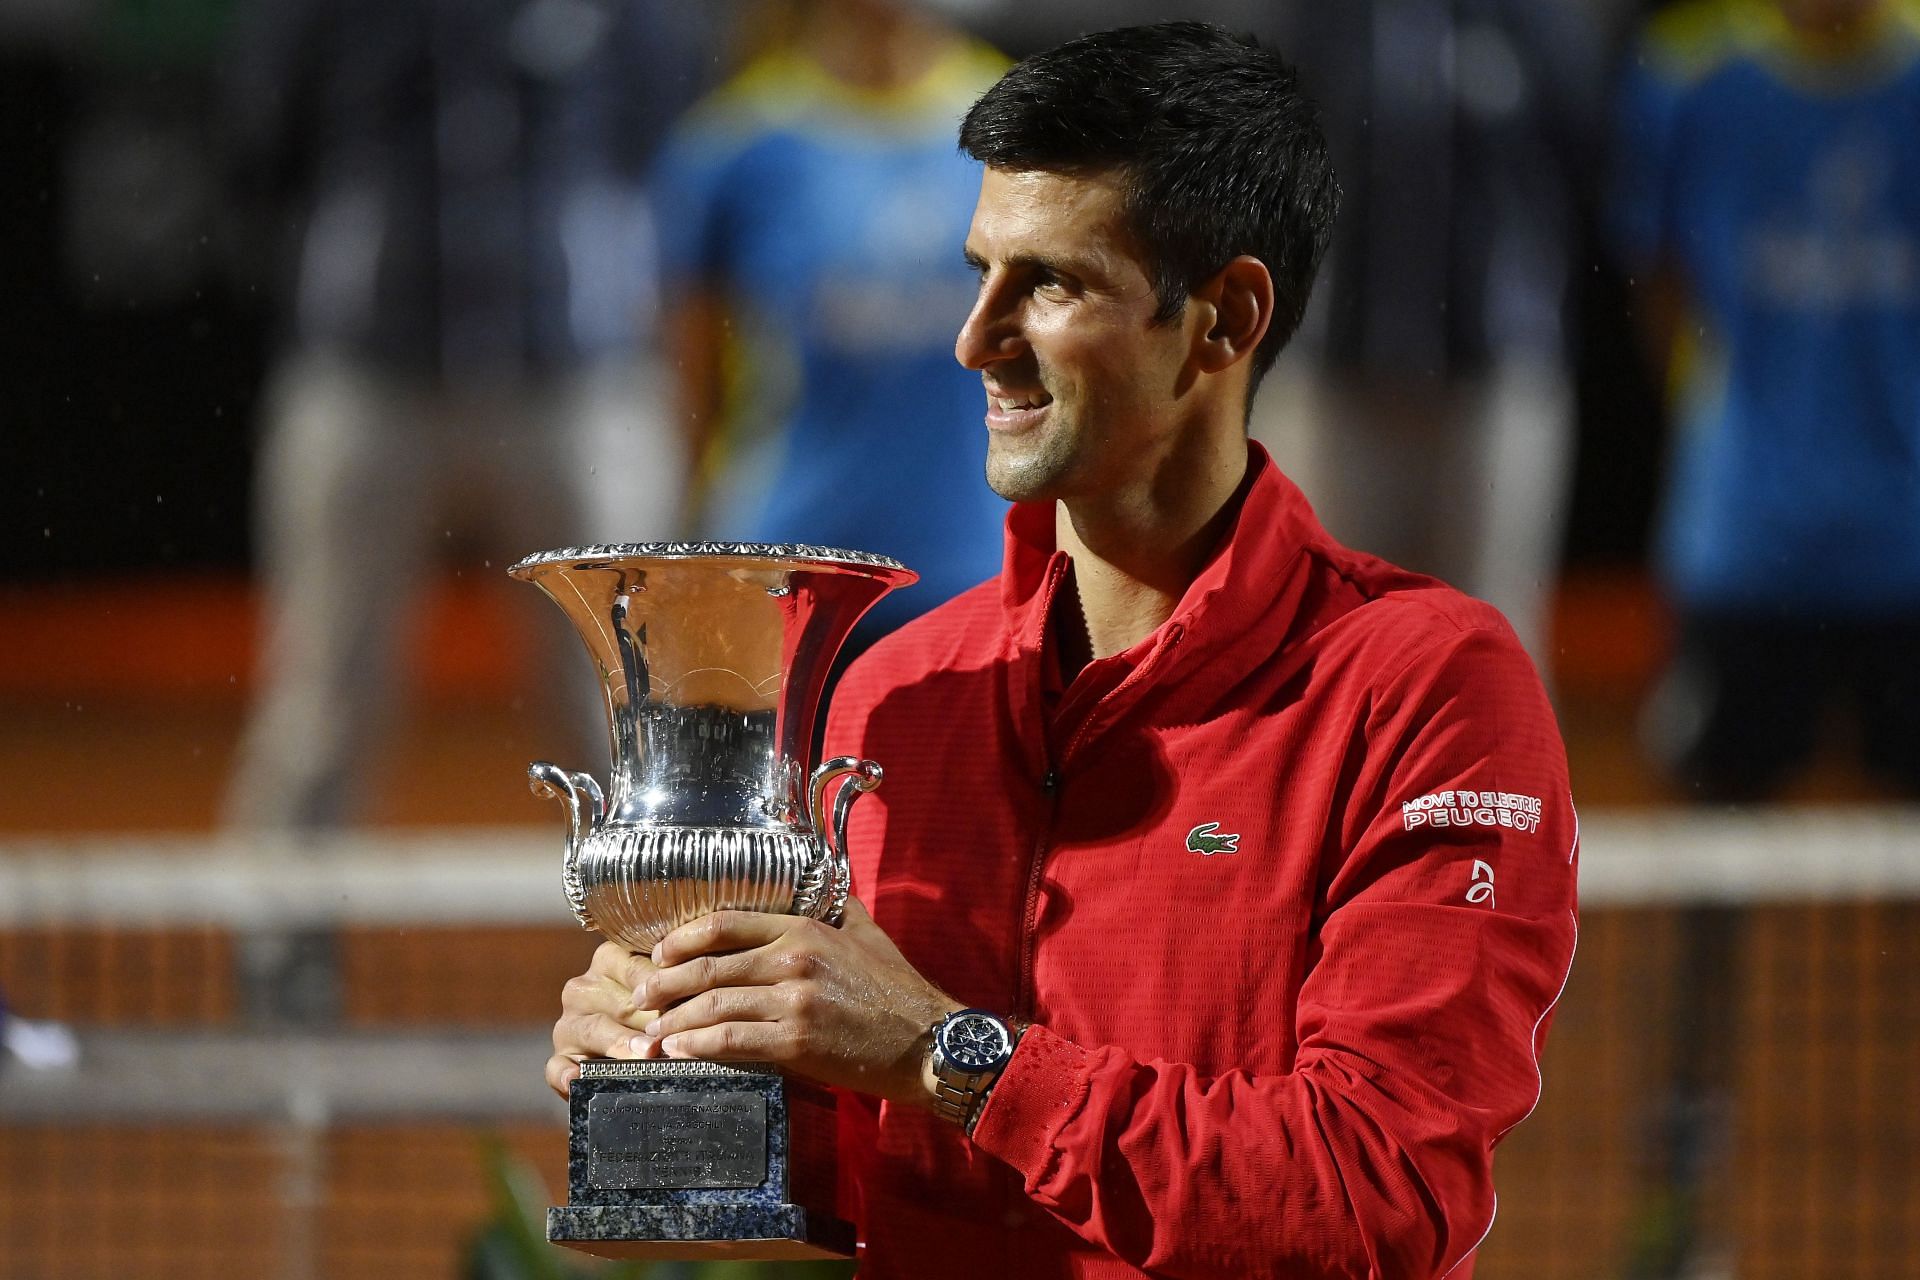 The World No. 1 with his 2020 Italian Open title